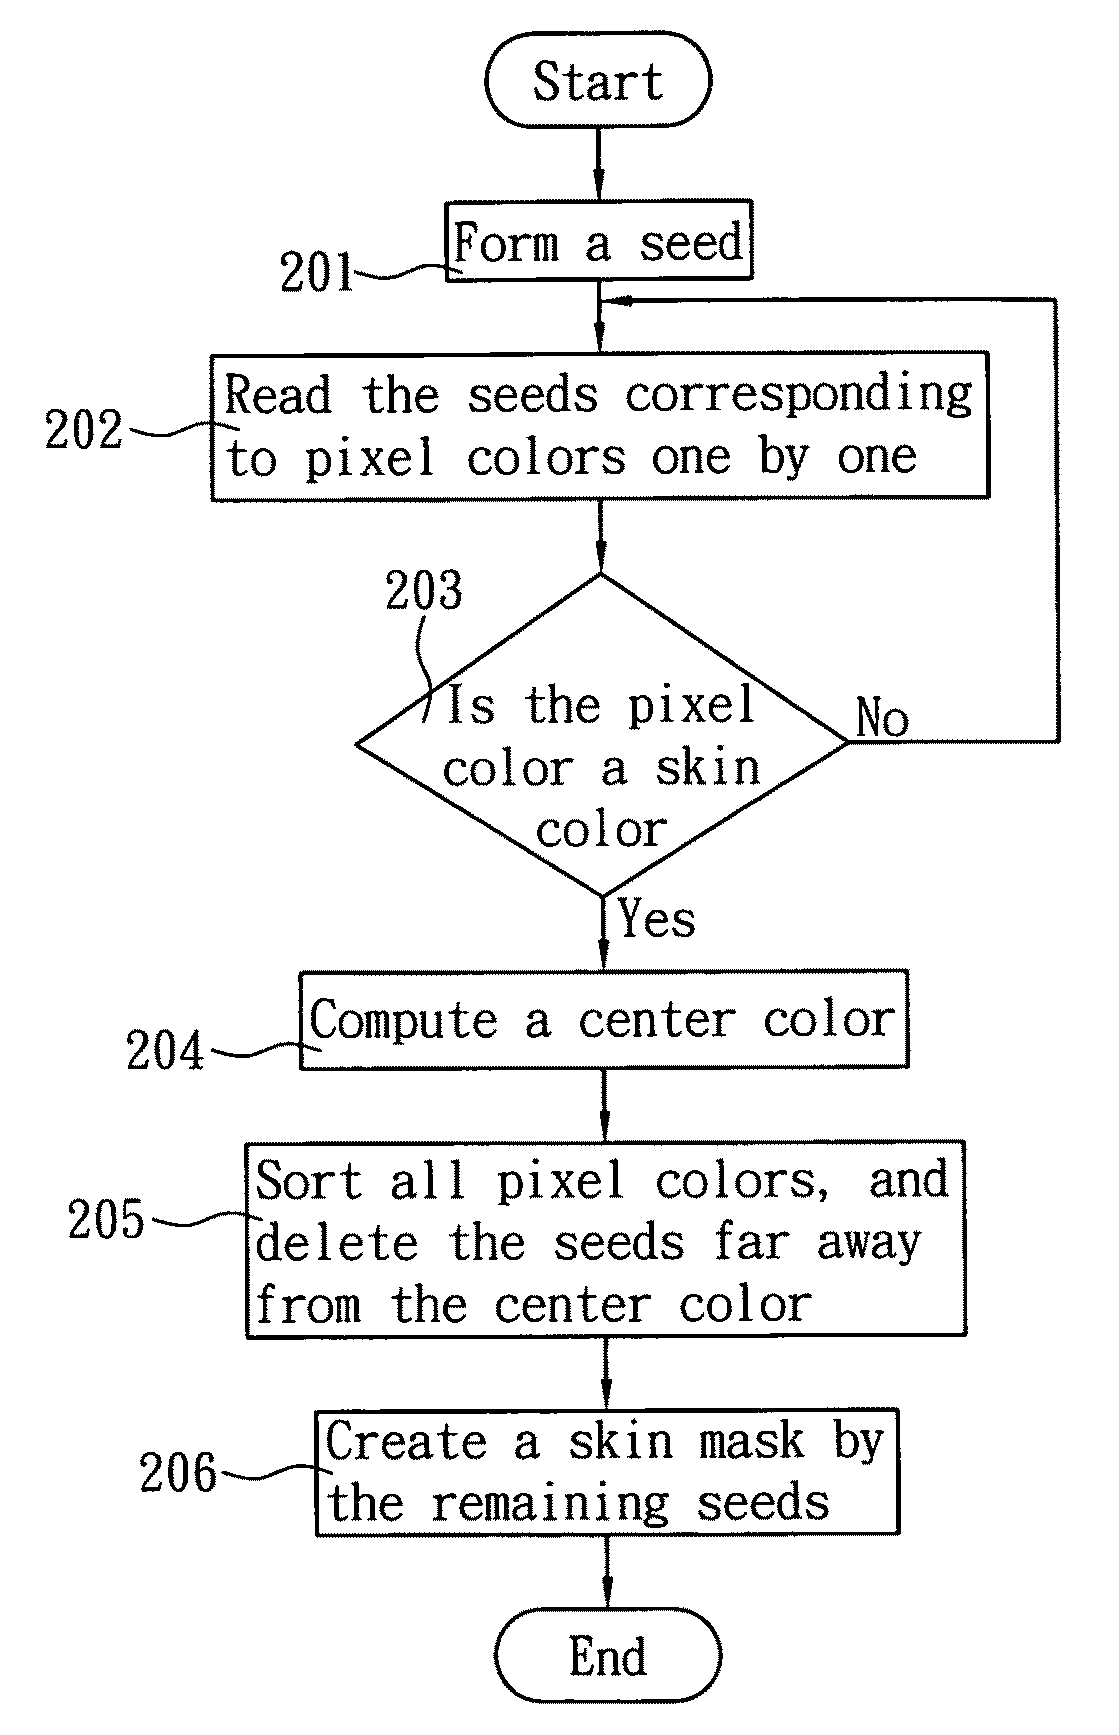 Face image processing method